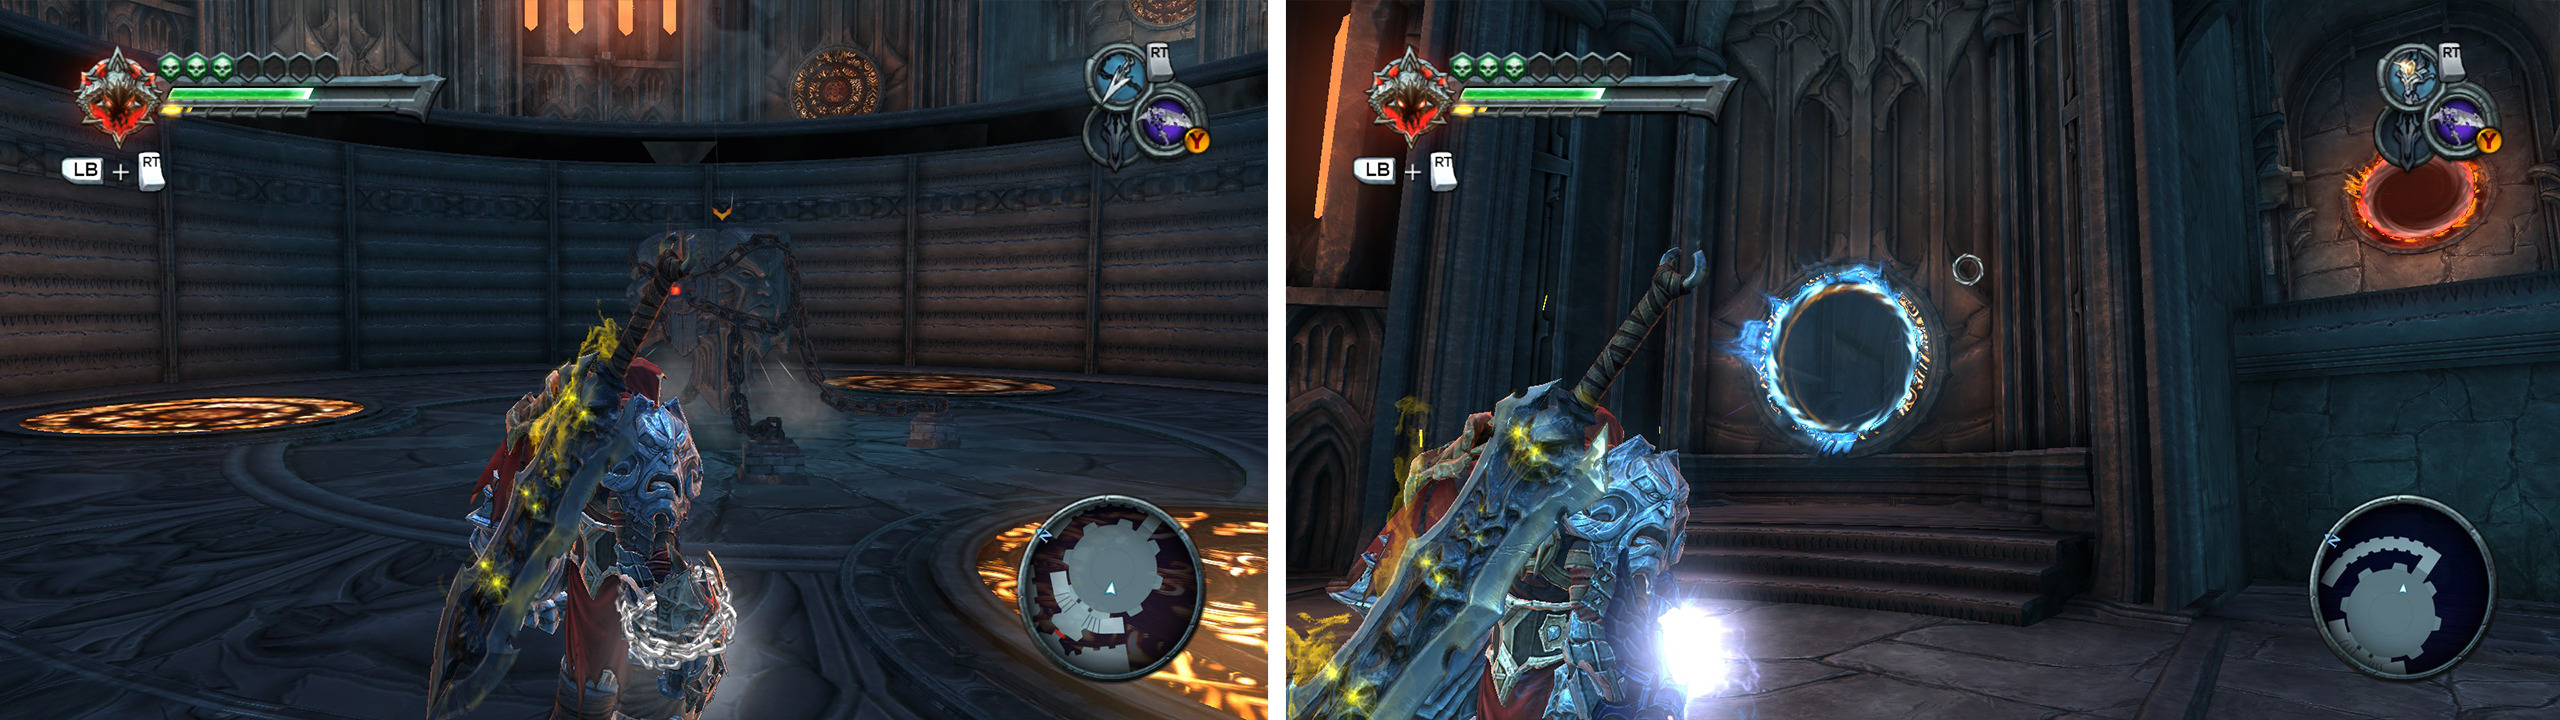 Grab the Voidwalker from the chest (left) and then use it to create portals to reach a higher platform (right).